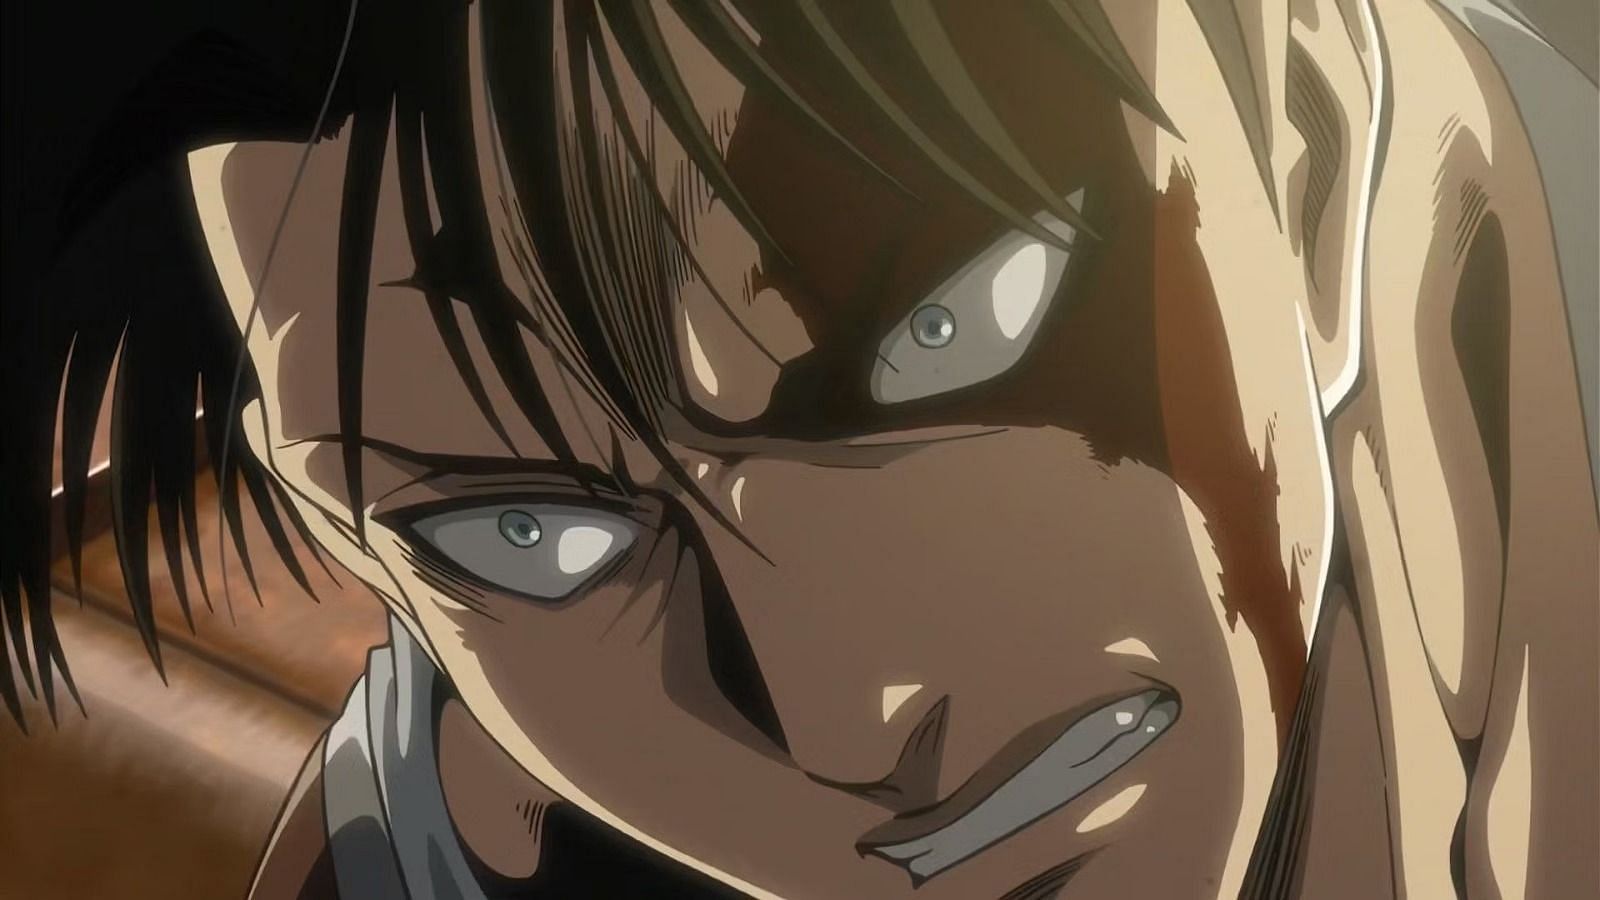 Levi as seen in the anime. (image via MAPPA)